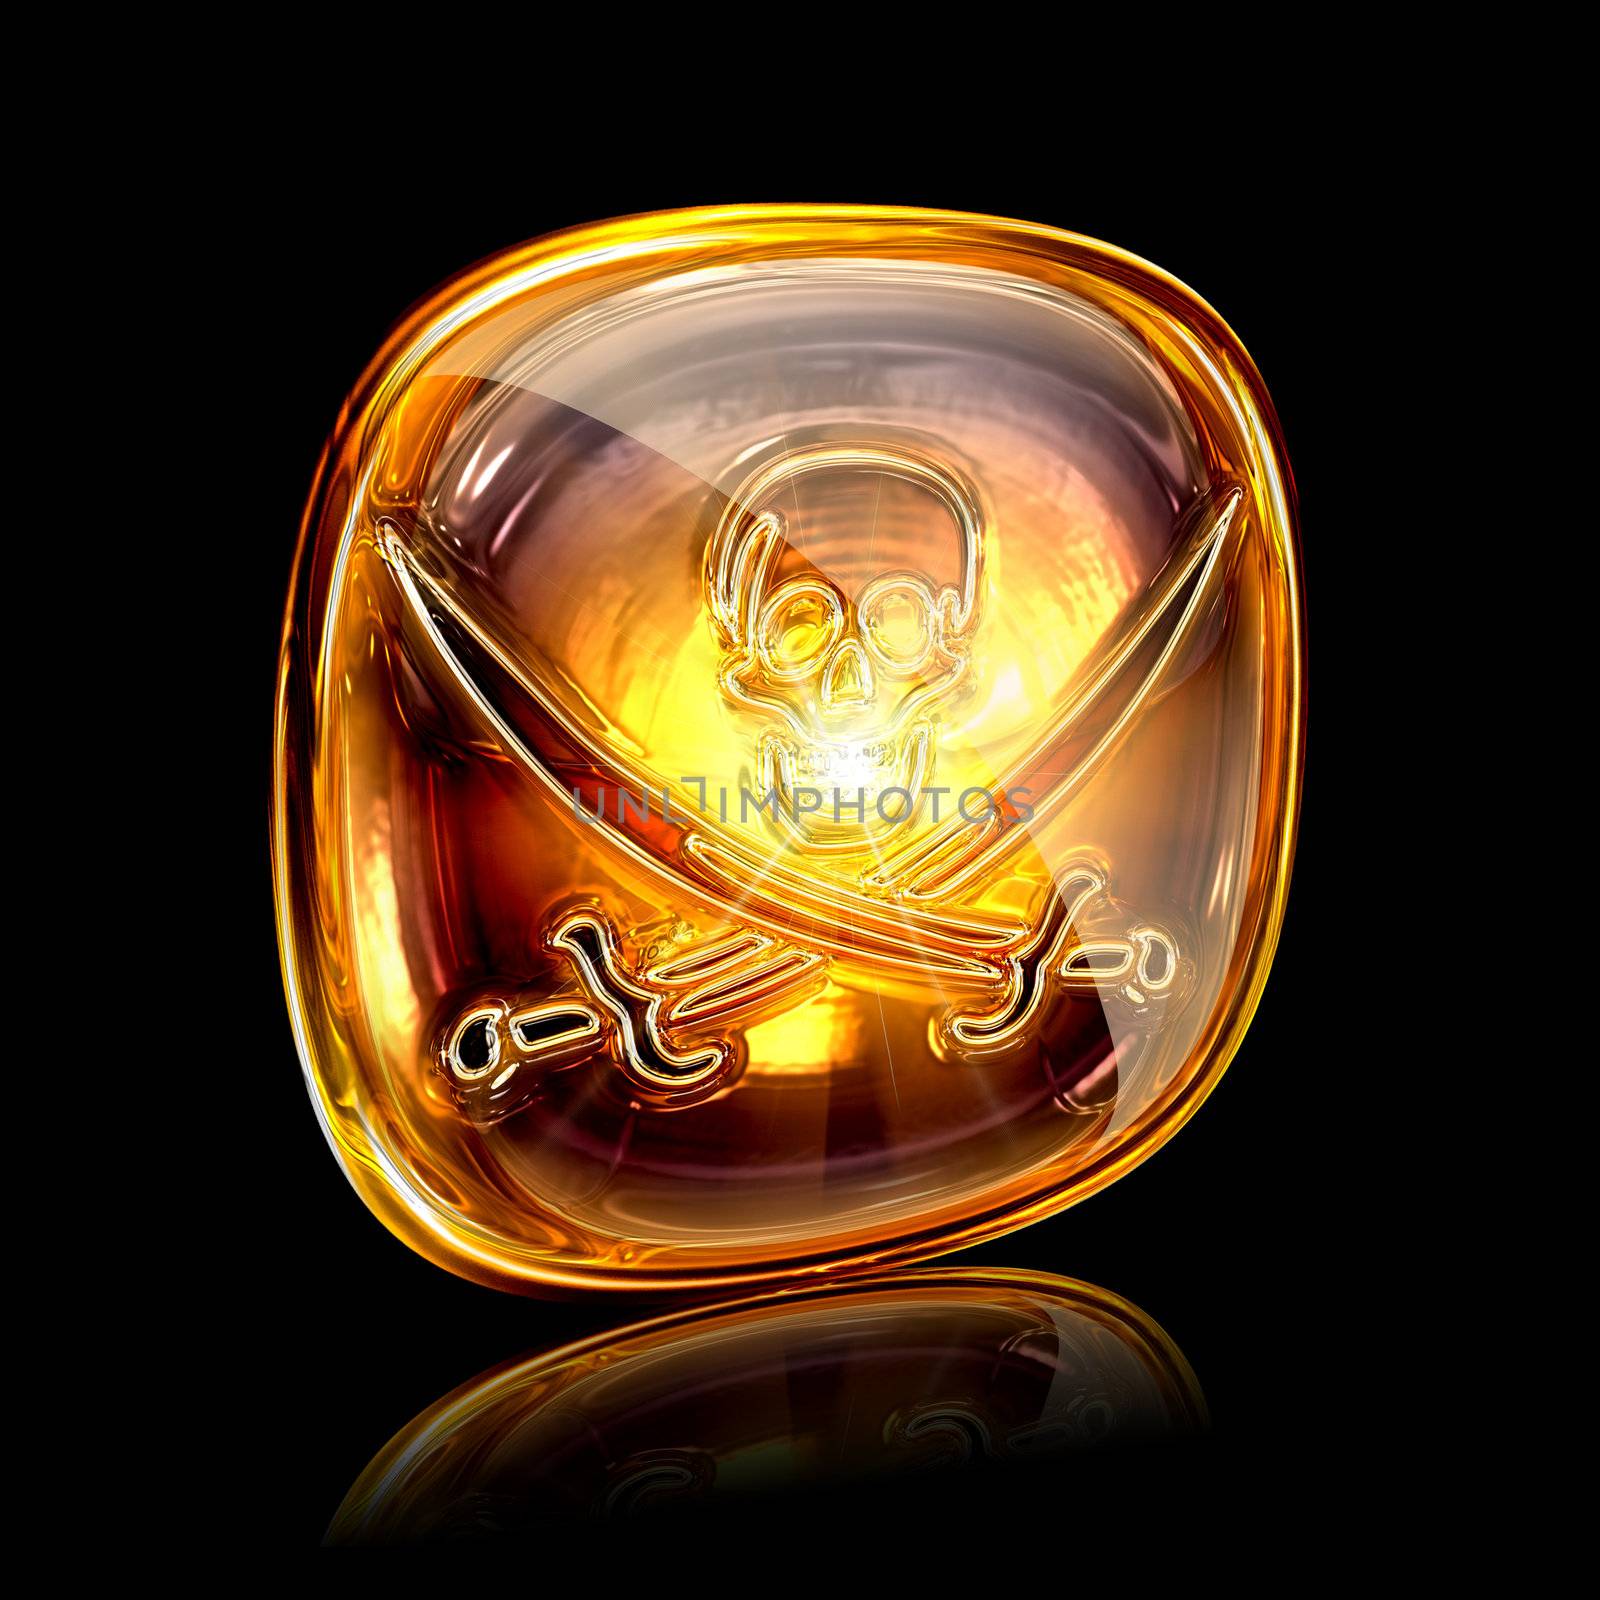 Pirate icon golden, isolated on black background